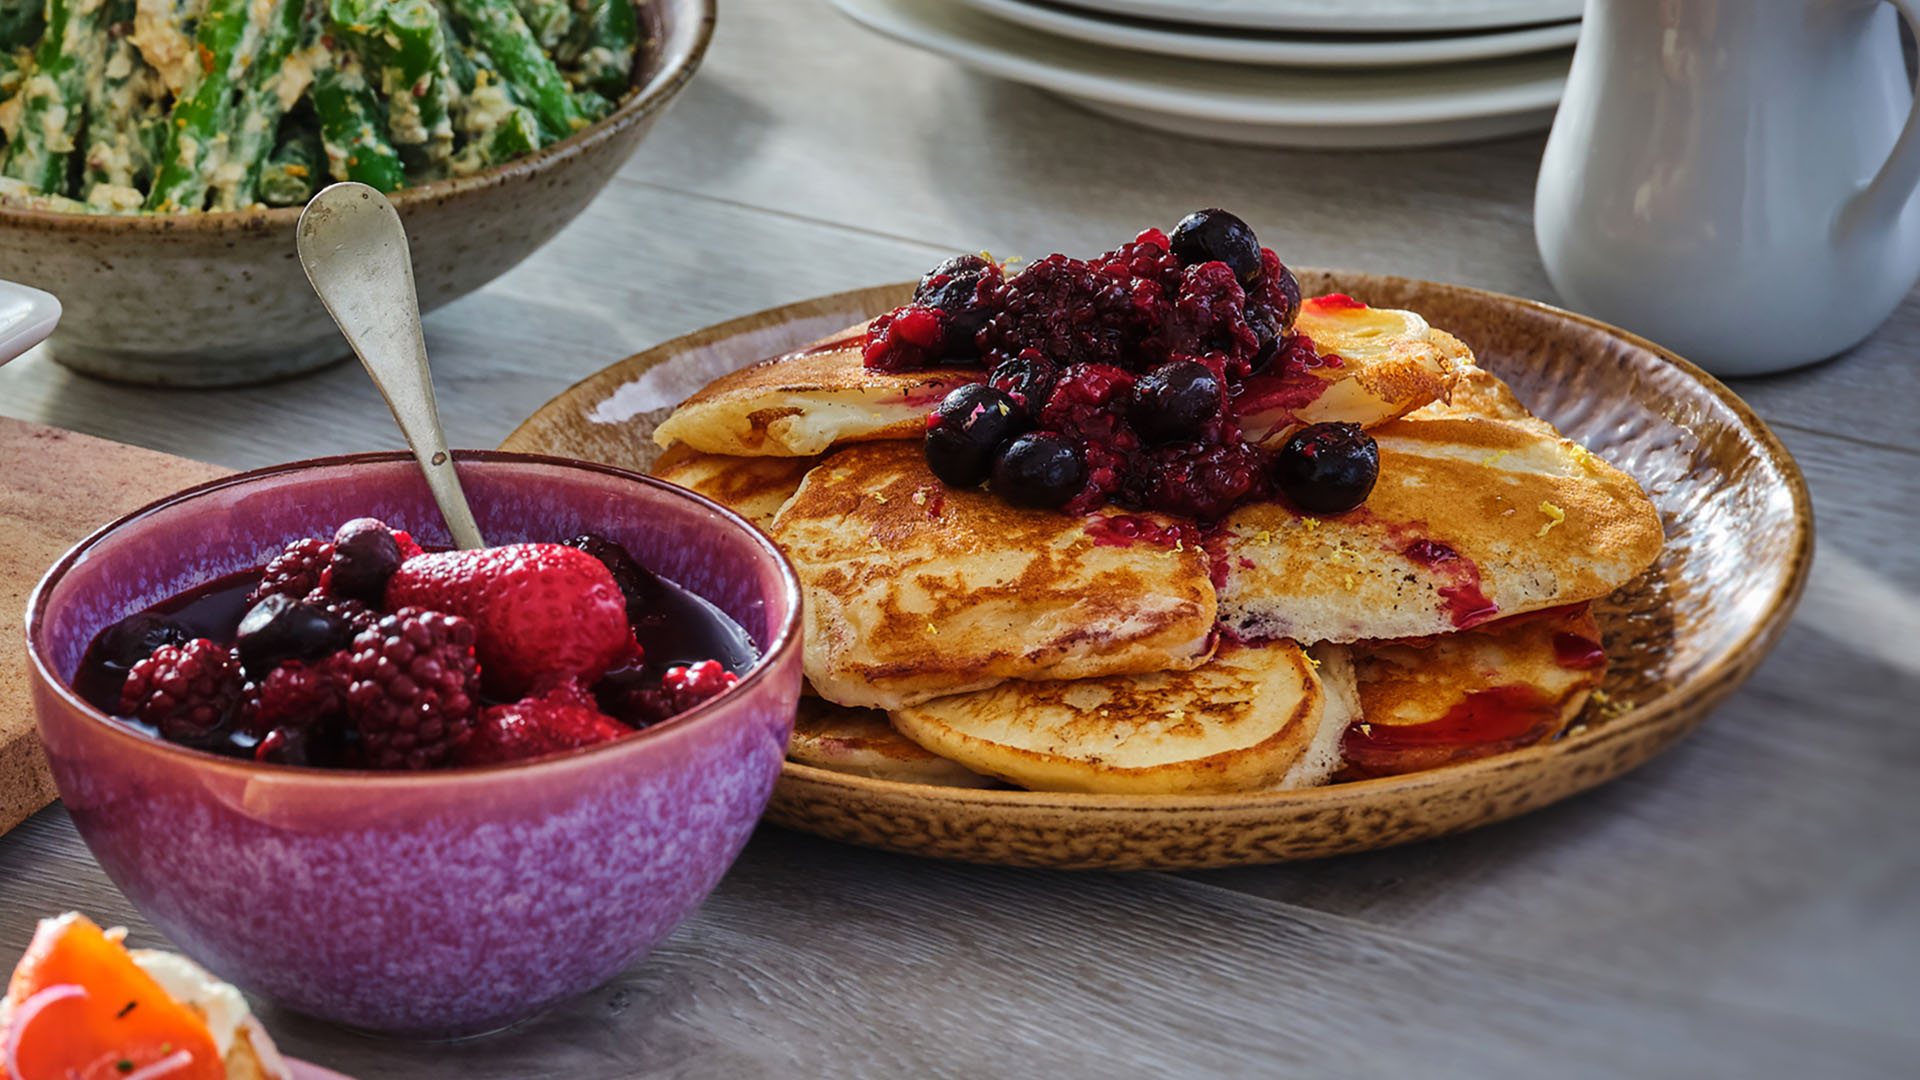 Lemon ricotta pancakes topped with fruit on a round purple dish with a bowl of fruit to the left of the plate.